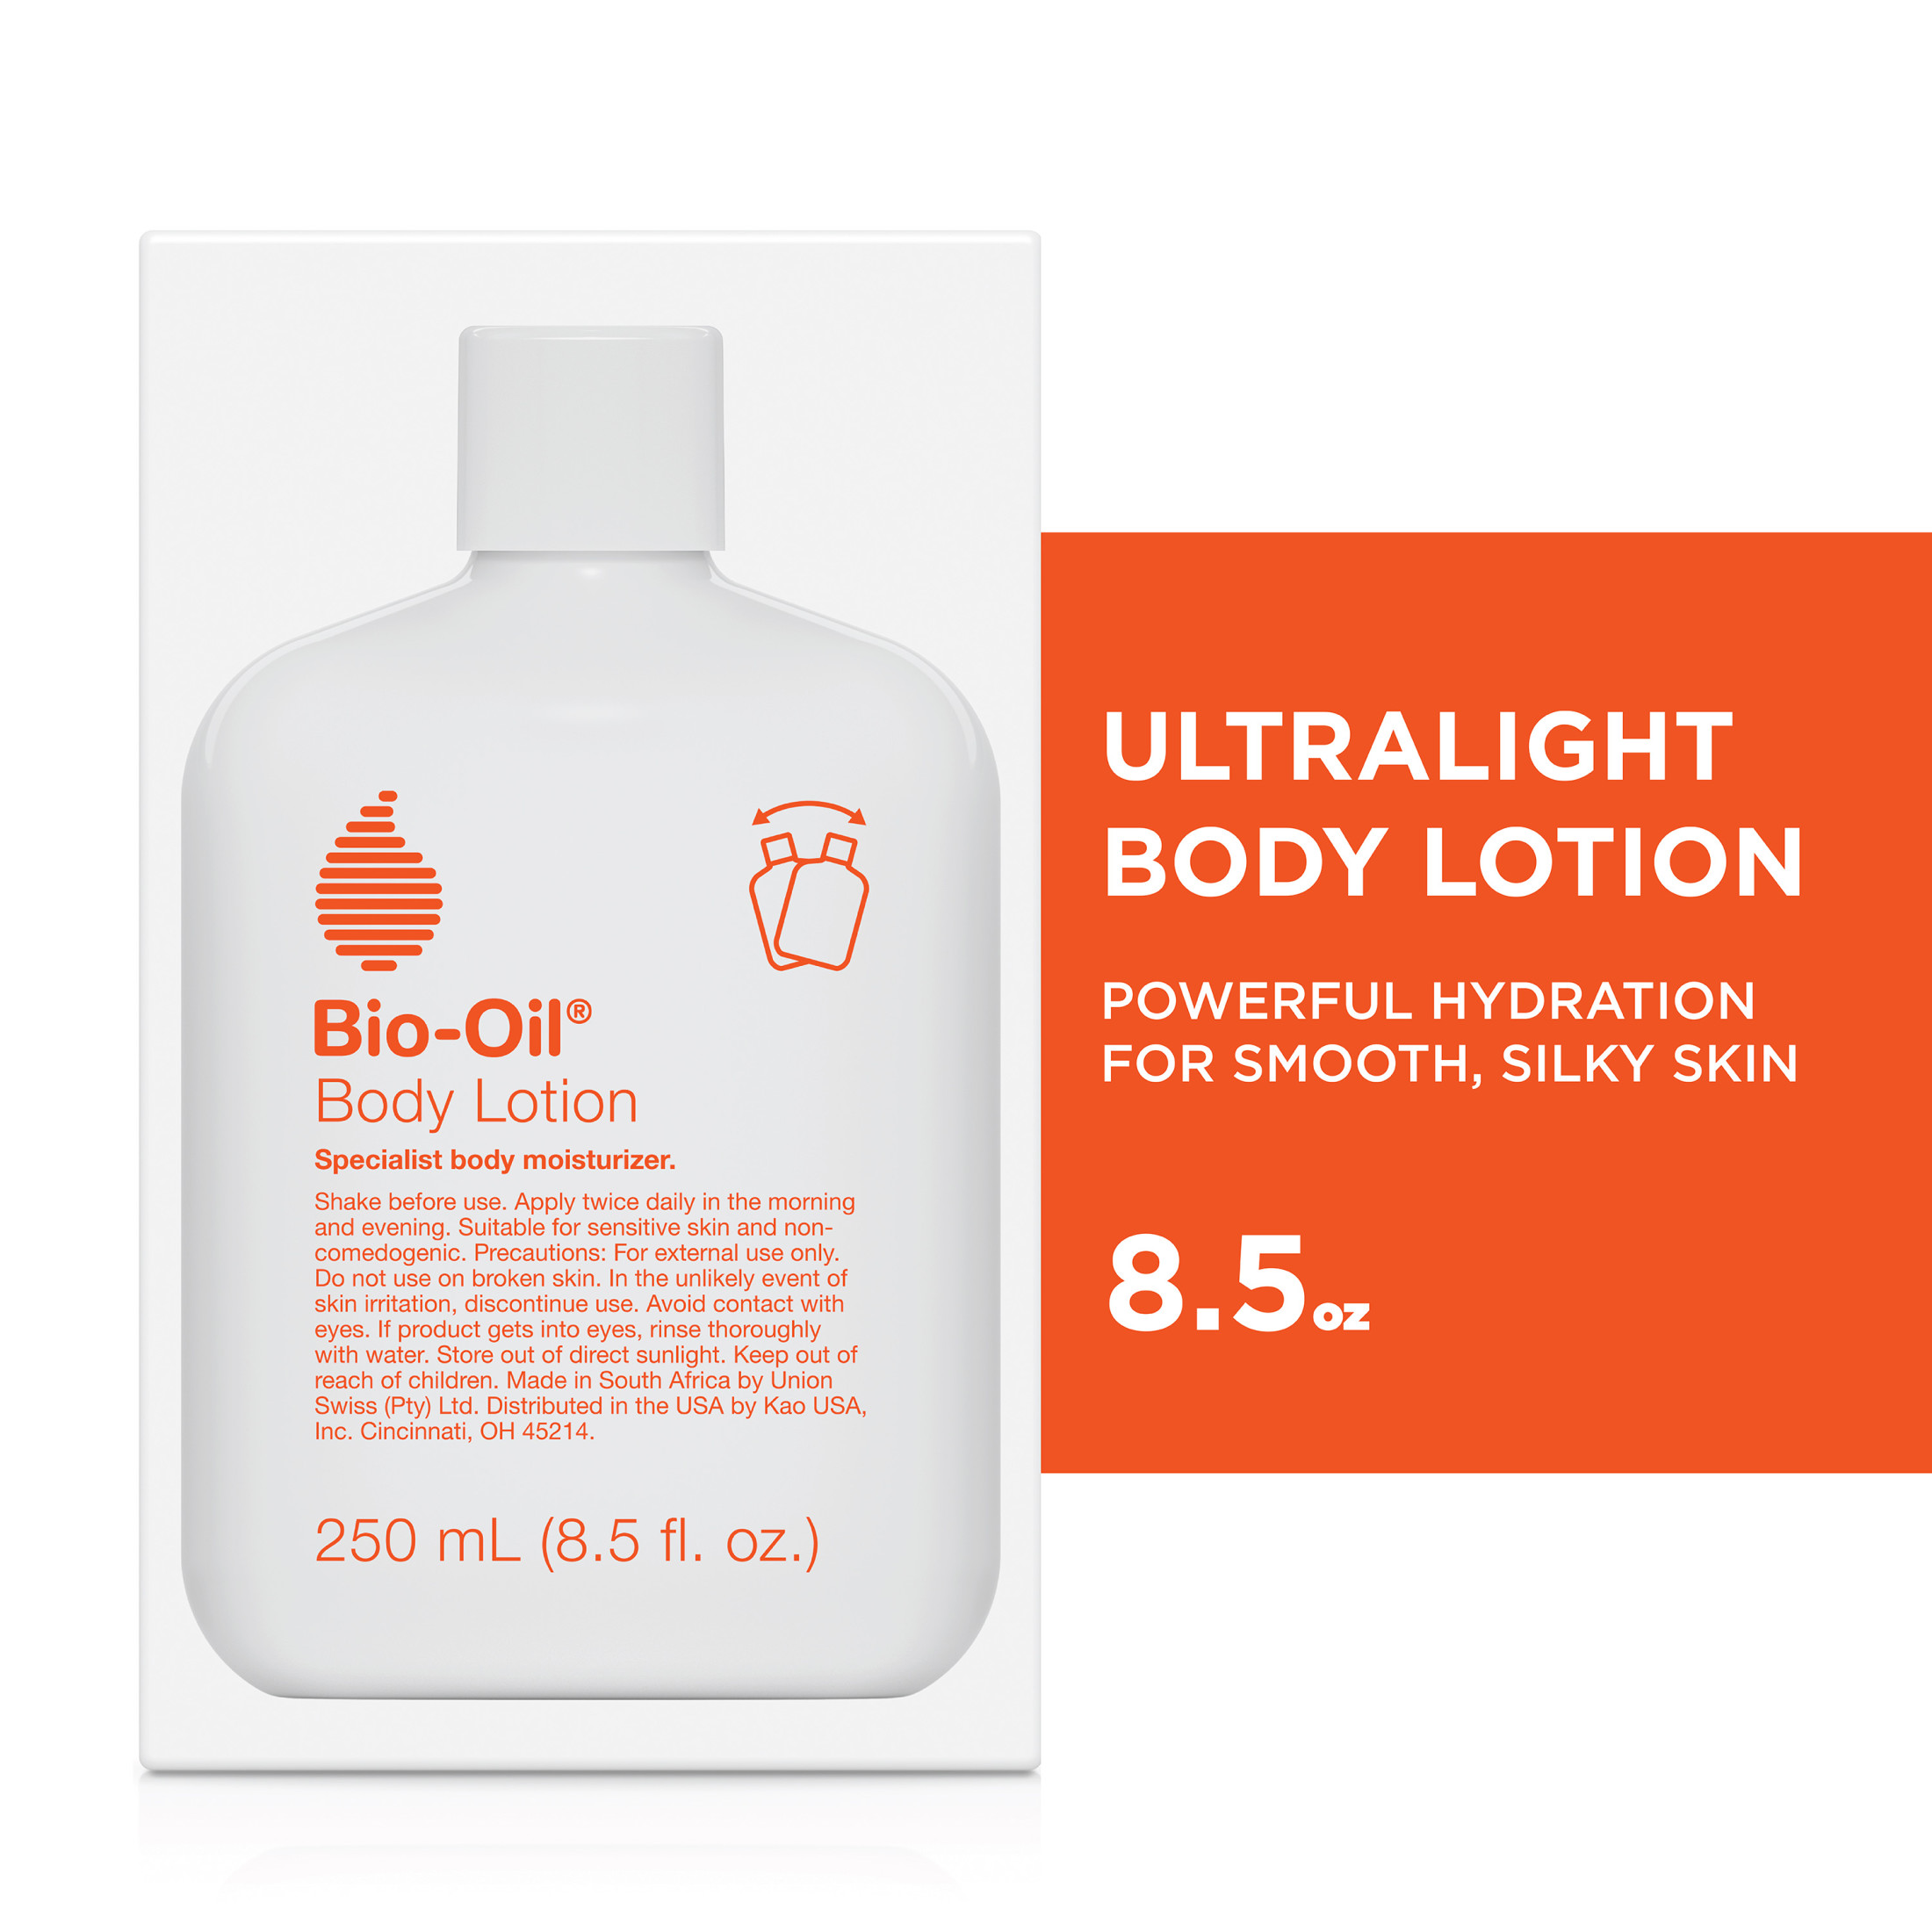 Bio-Oil Moisturizing Body Lotion for Dry Skin, Ultra-Lightweight High-Oil Hydration, with Jojoba Oil, Rosehip Oil, Shea Oil, and Hyaluronic Acid, 8.5 oz - image 1 of 11